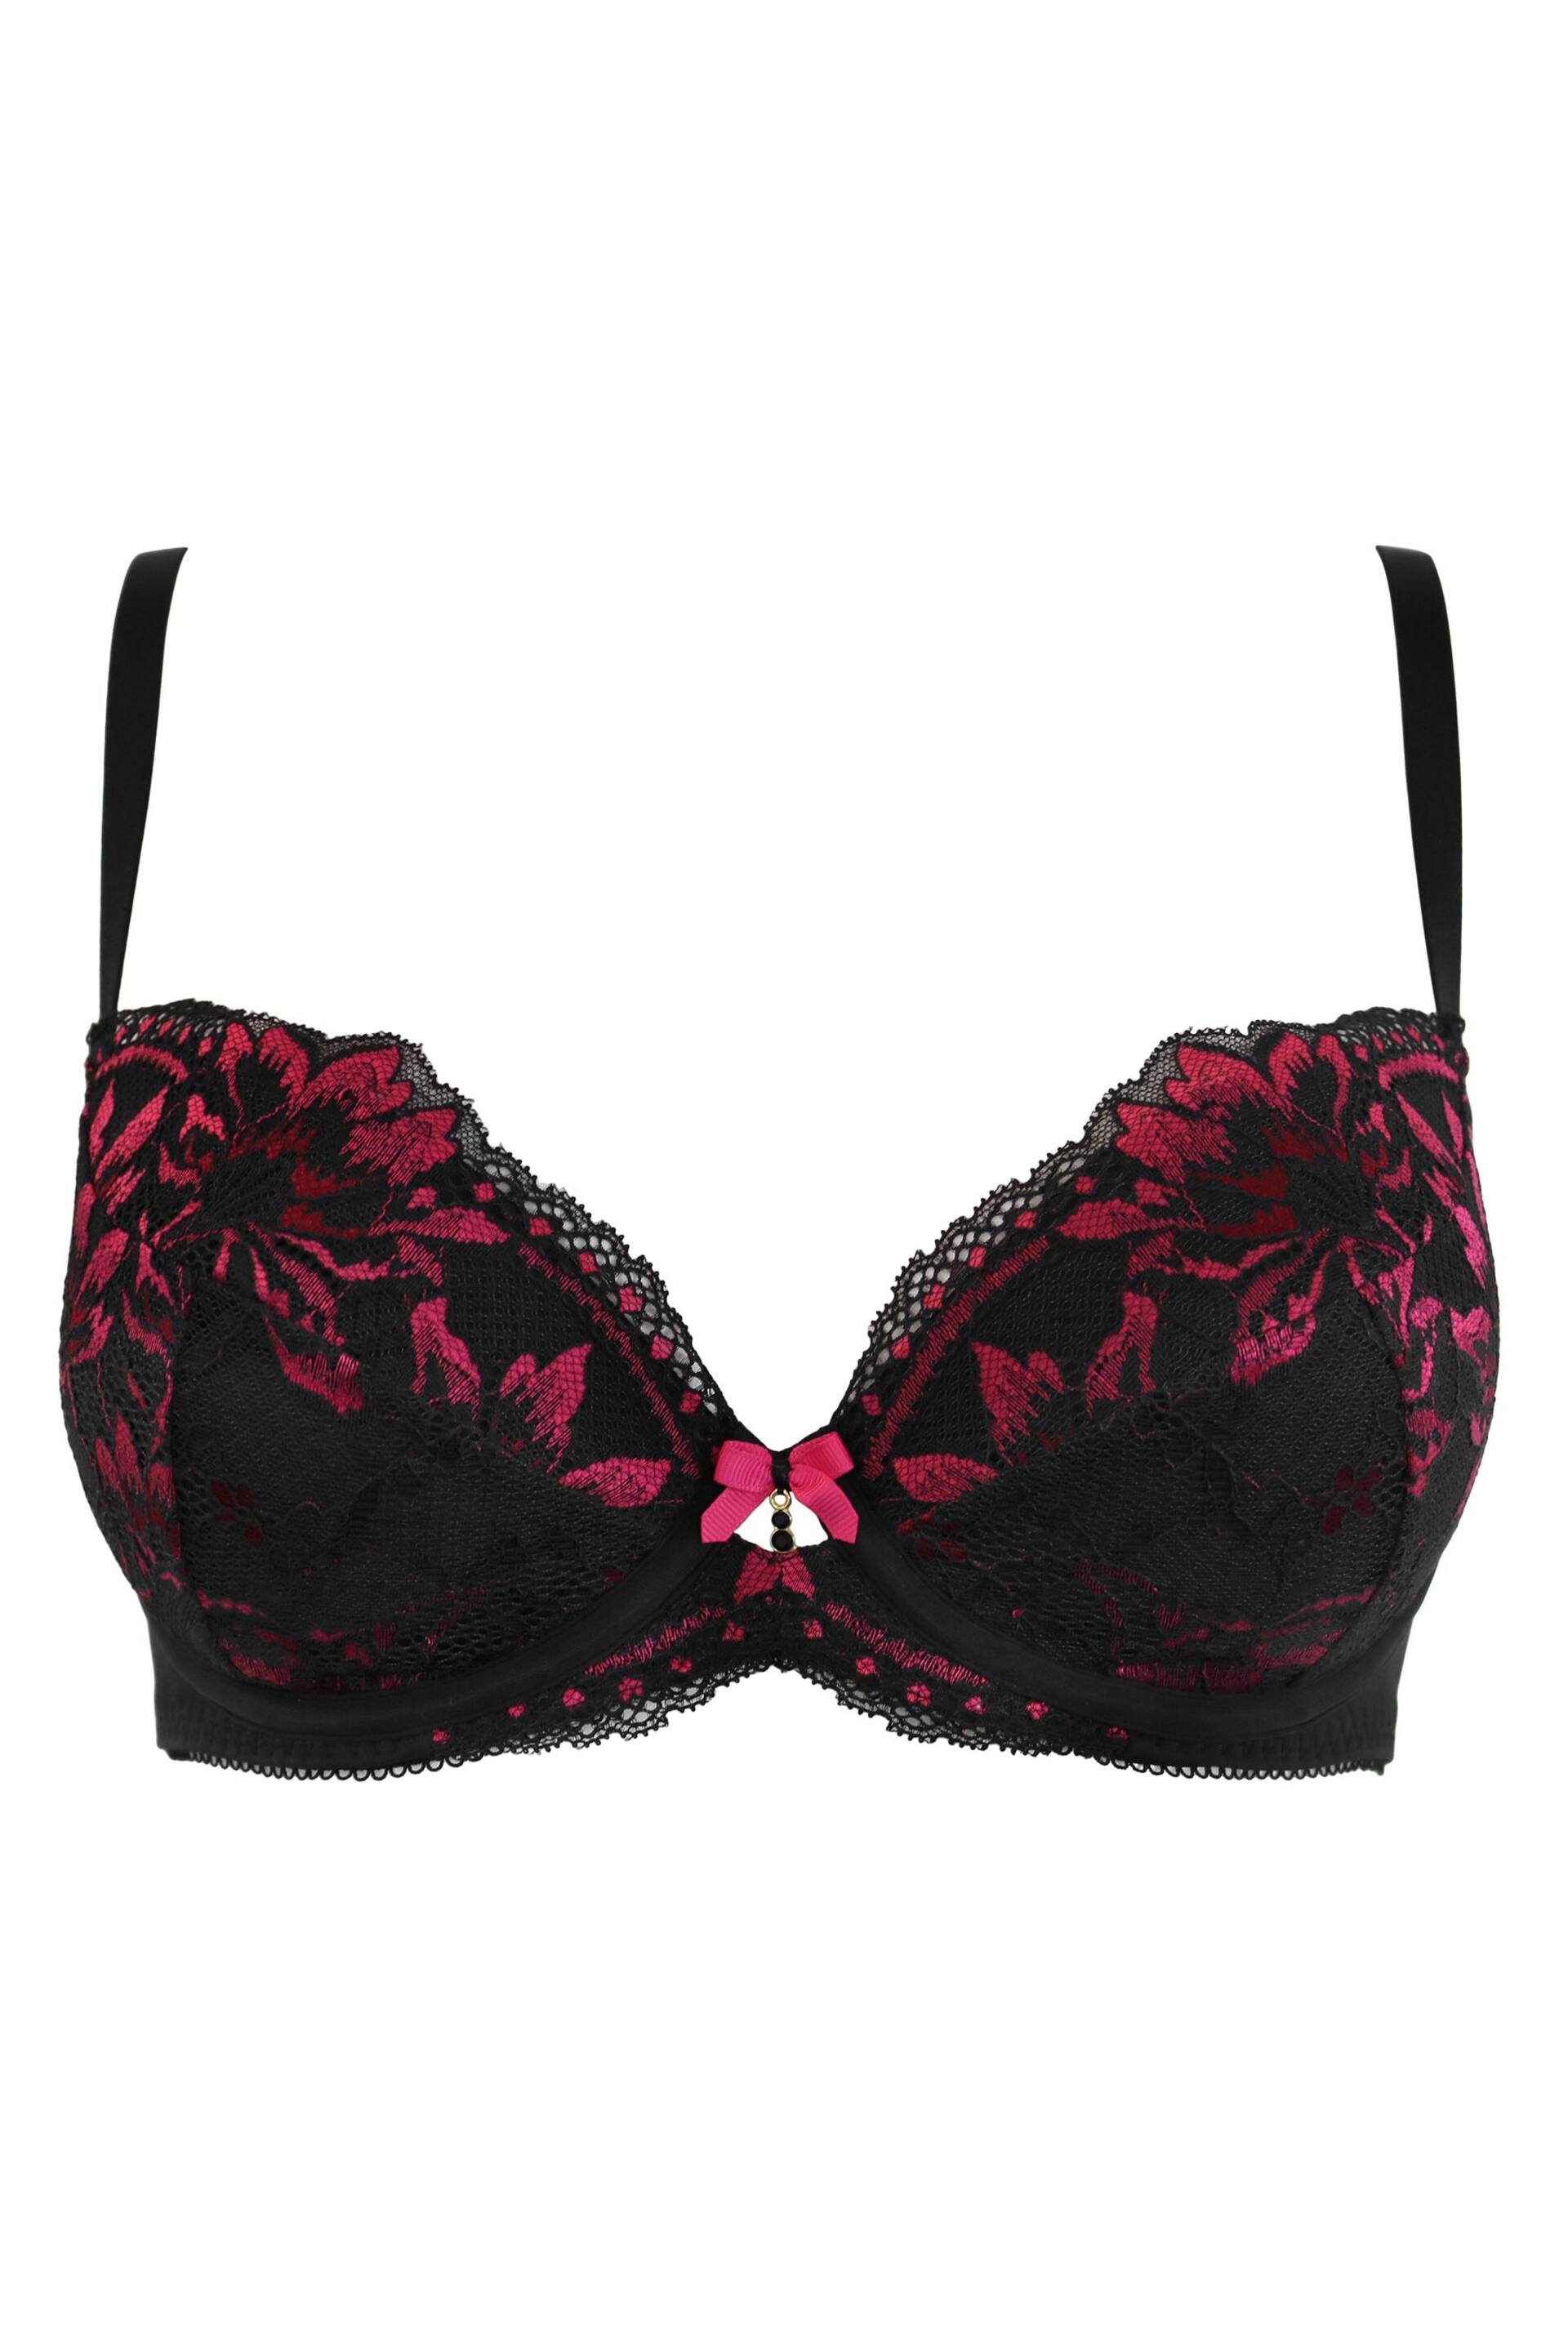 Pour Moi Black Padded J'Adore Bra - Image 4 of 5